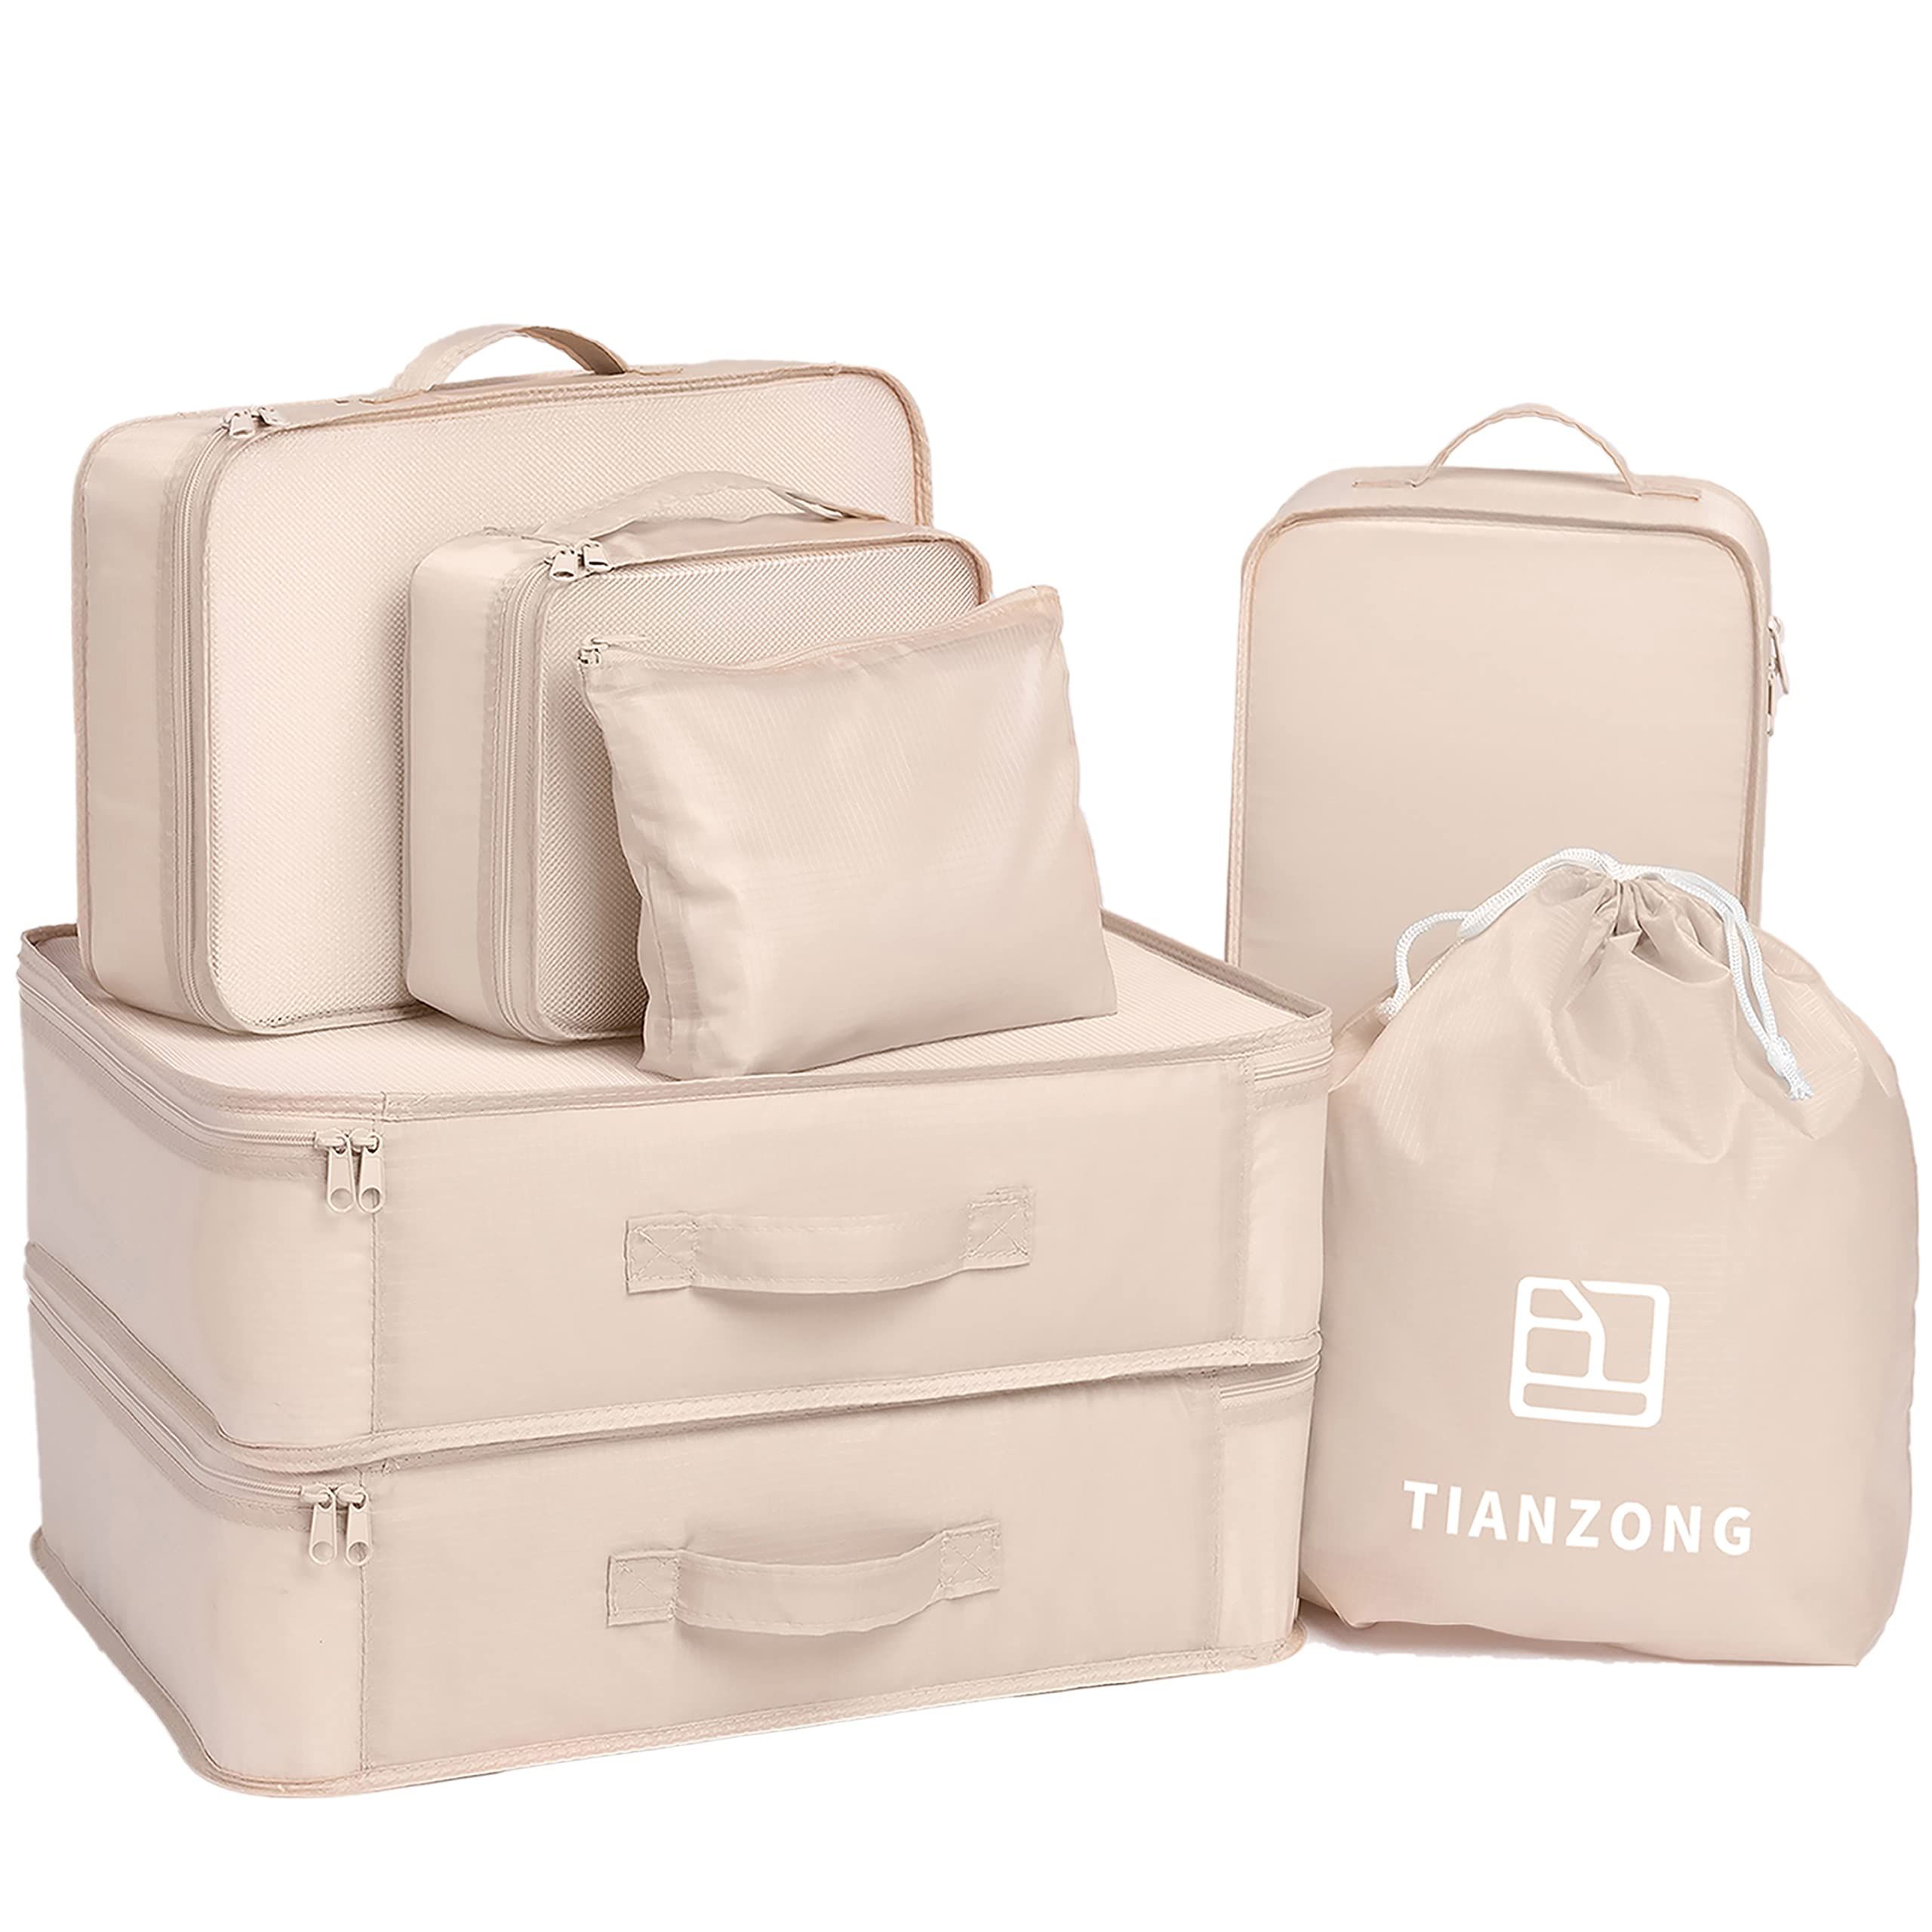 TianZong 7-piece Set Packing Cubes, Travel Bags for Luggage, Packing Organizers with Shoe Bag (Be... | Amazon (US)